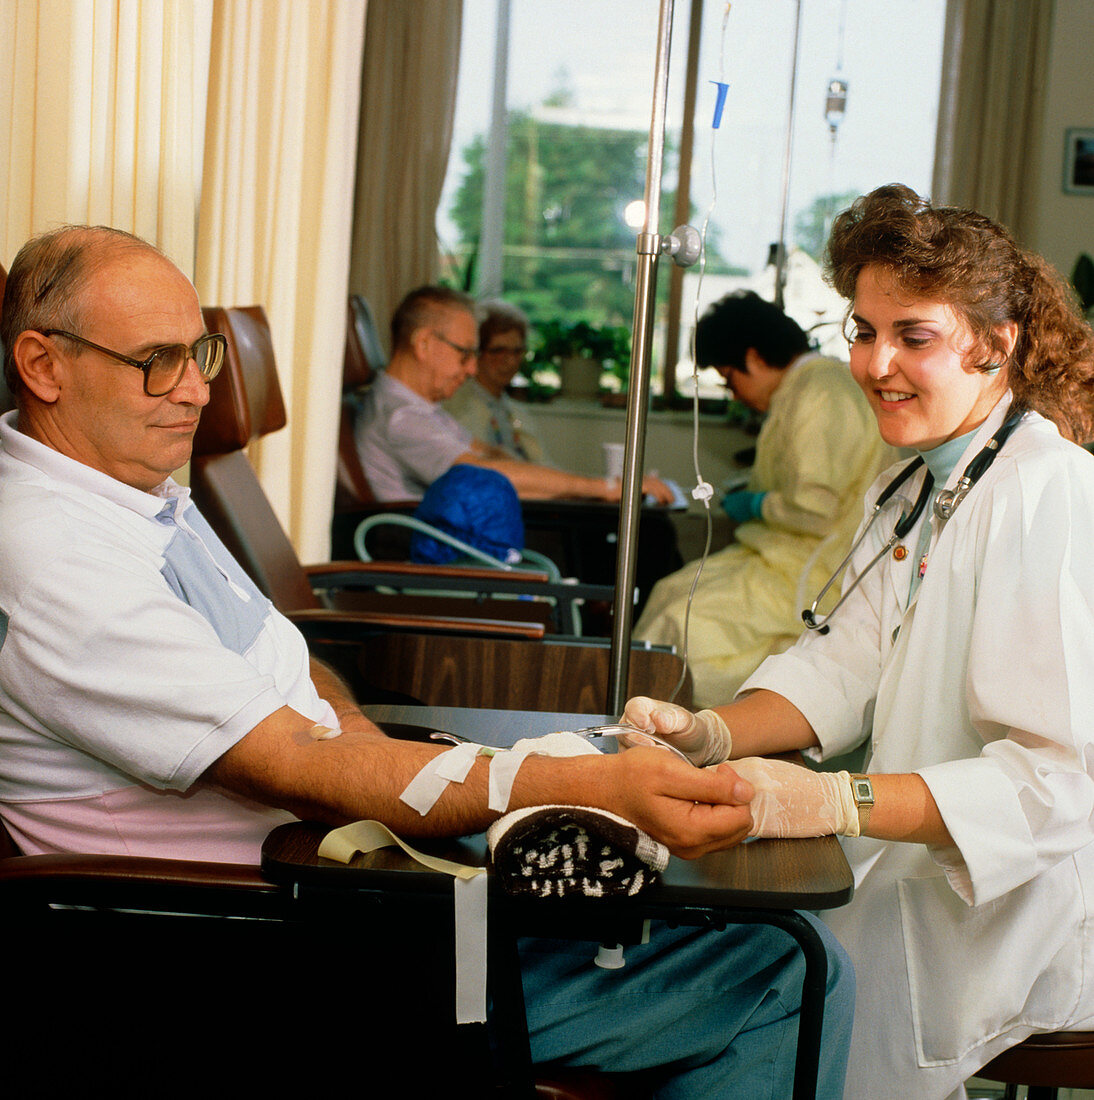 Oncology patient receiving an injection